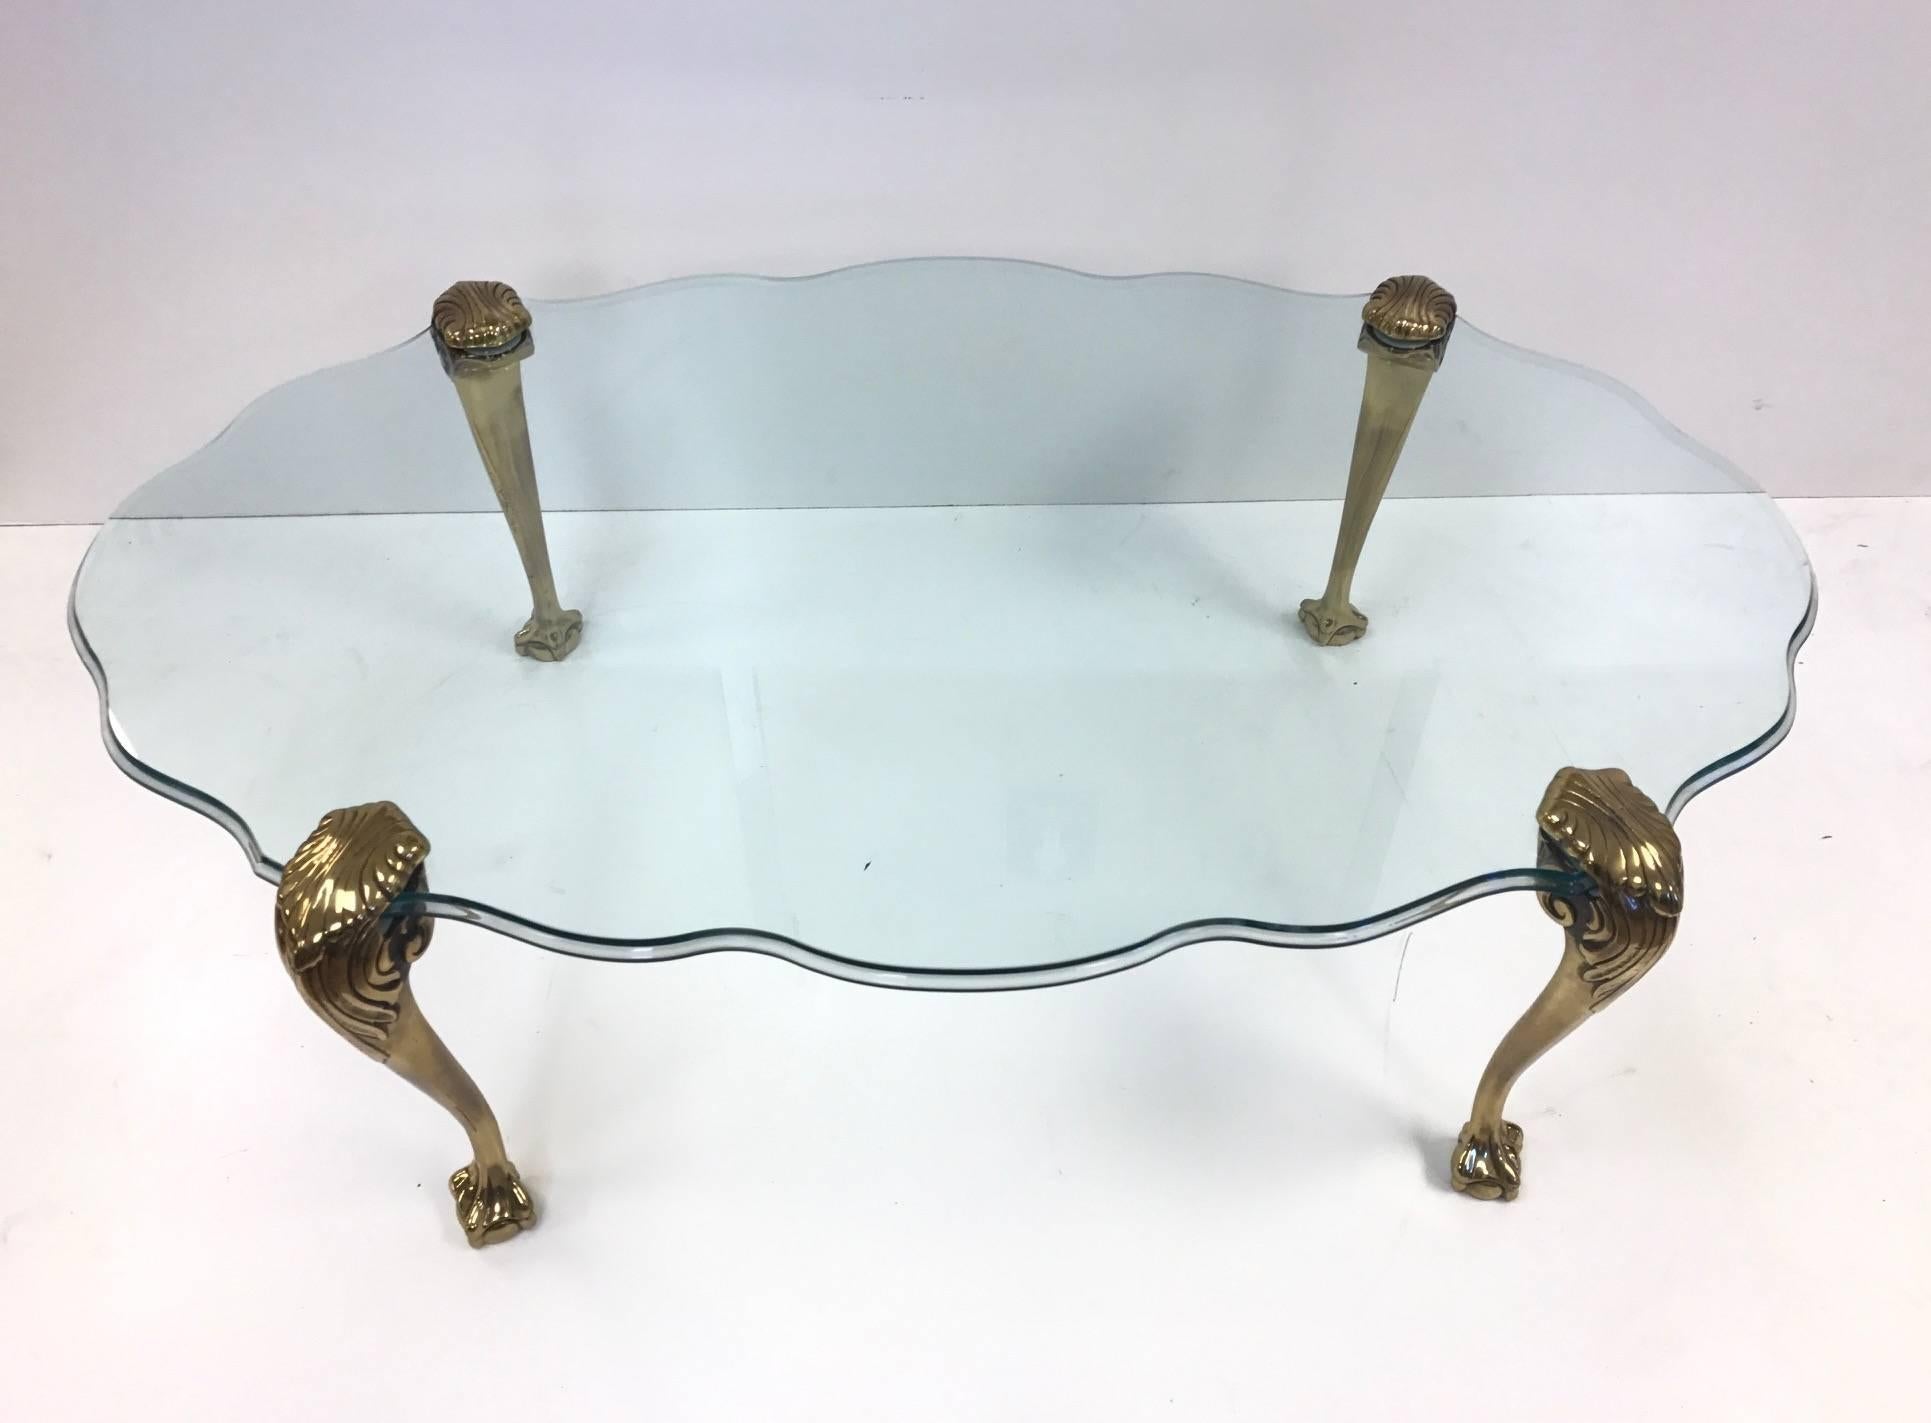 Brass claw and ball glass top coffee table. Heavy solid brass legs with a scalloped edge bevelled glass.